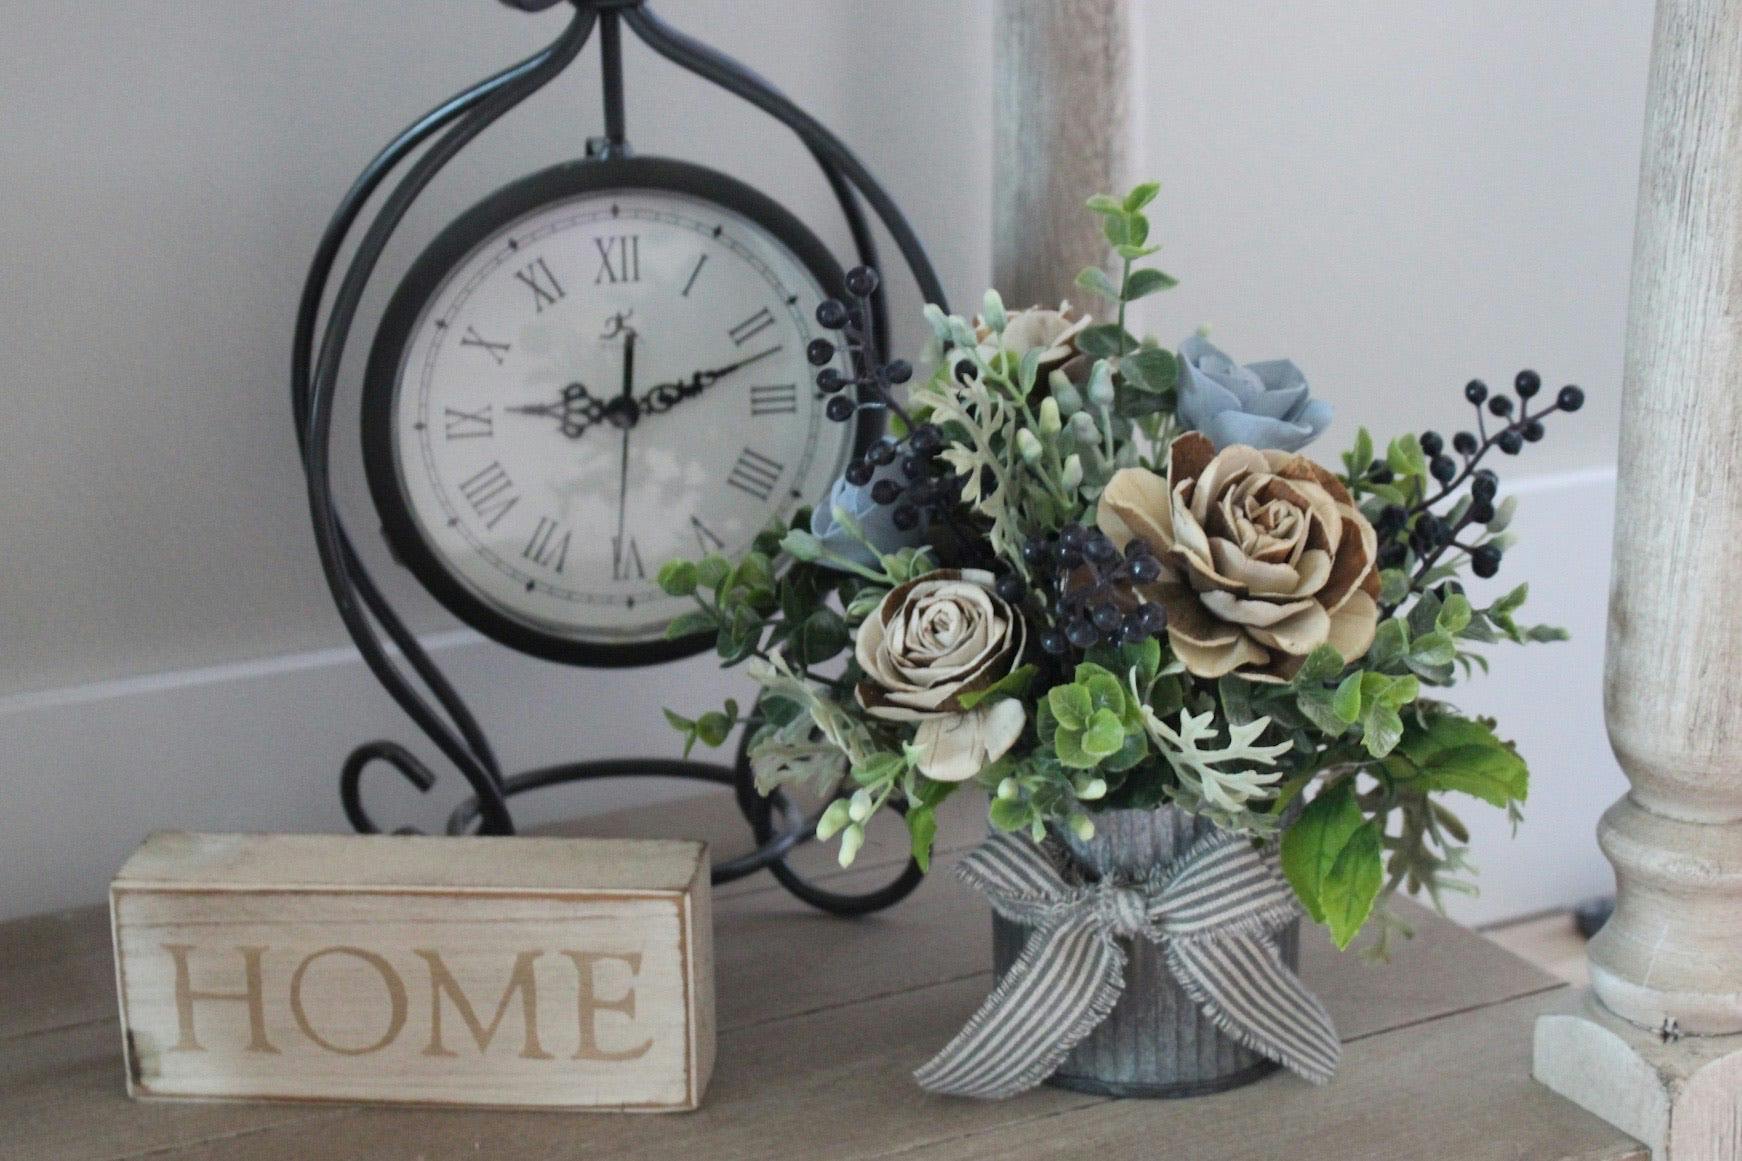 Countryside - Farmhouse Rustic Wood Flowers